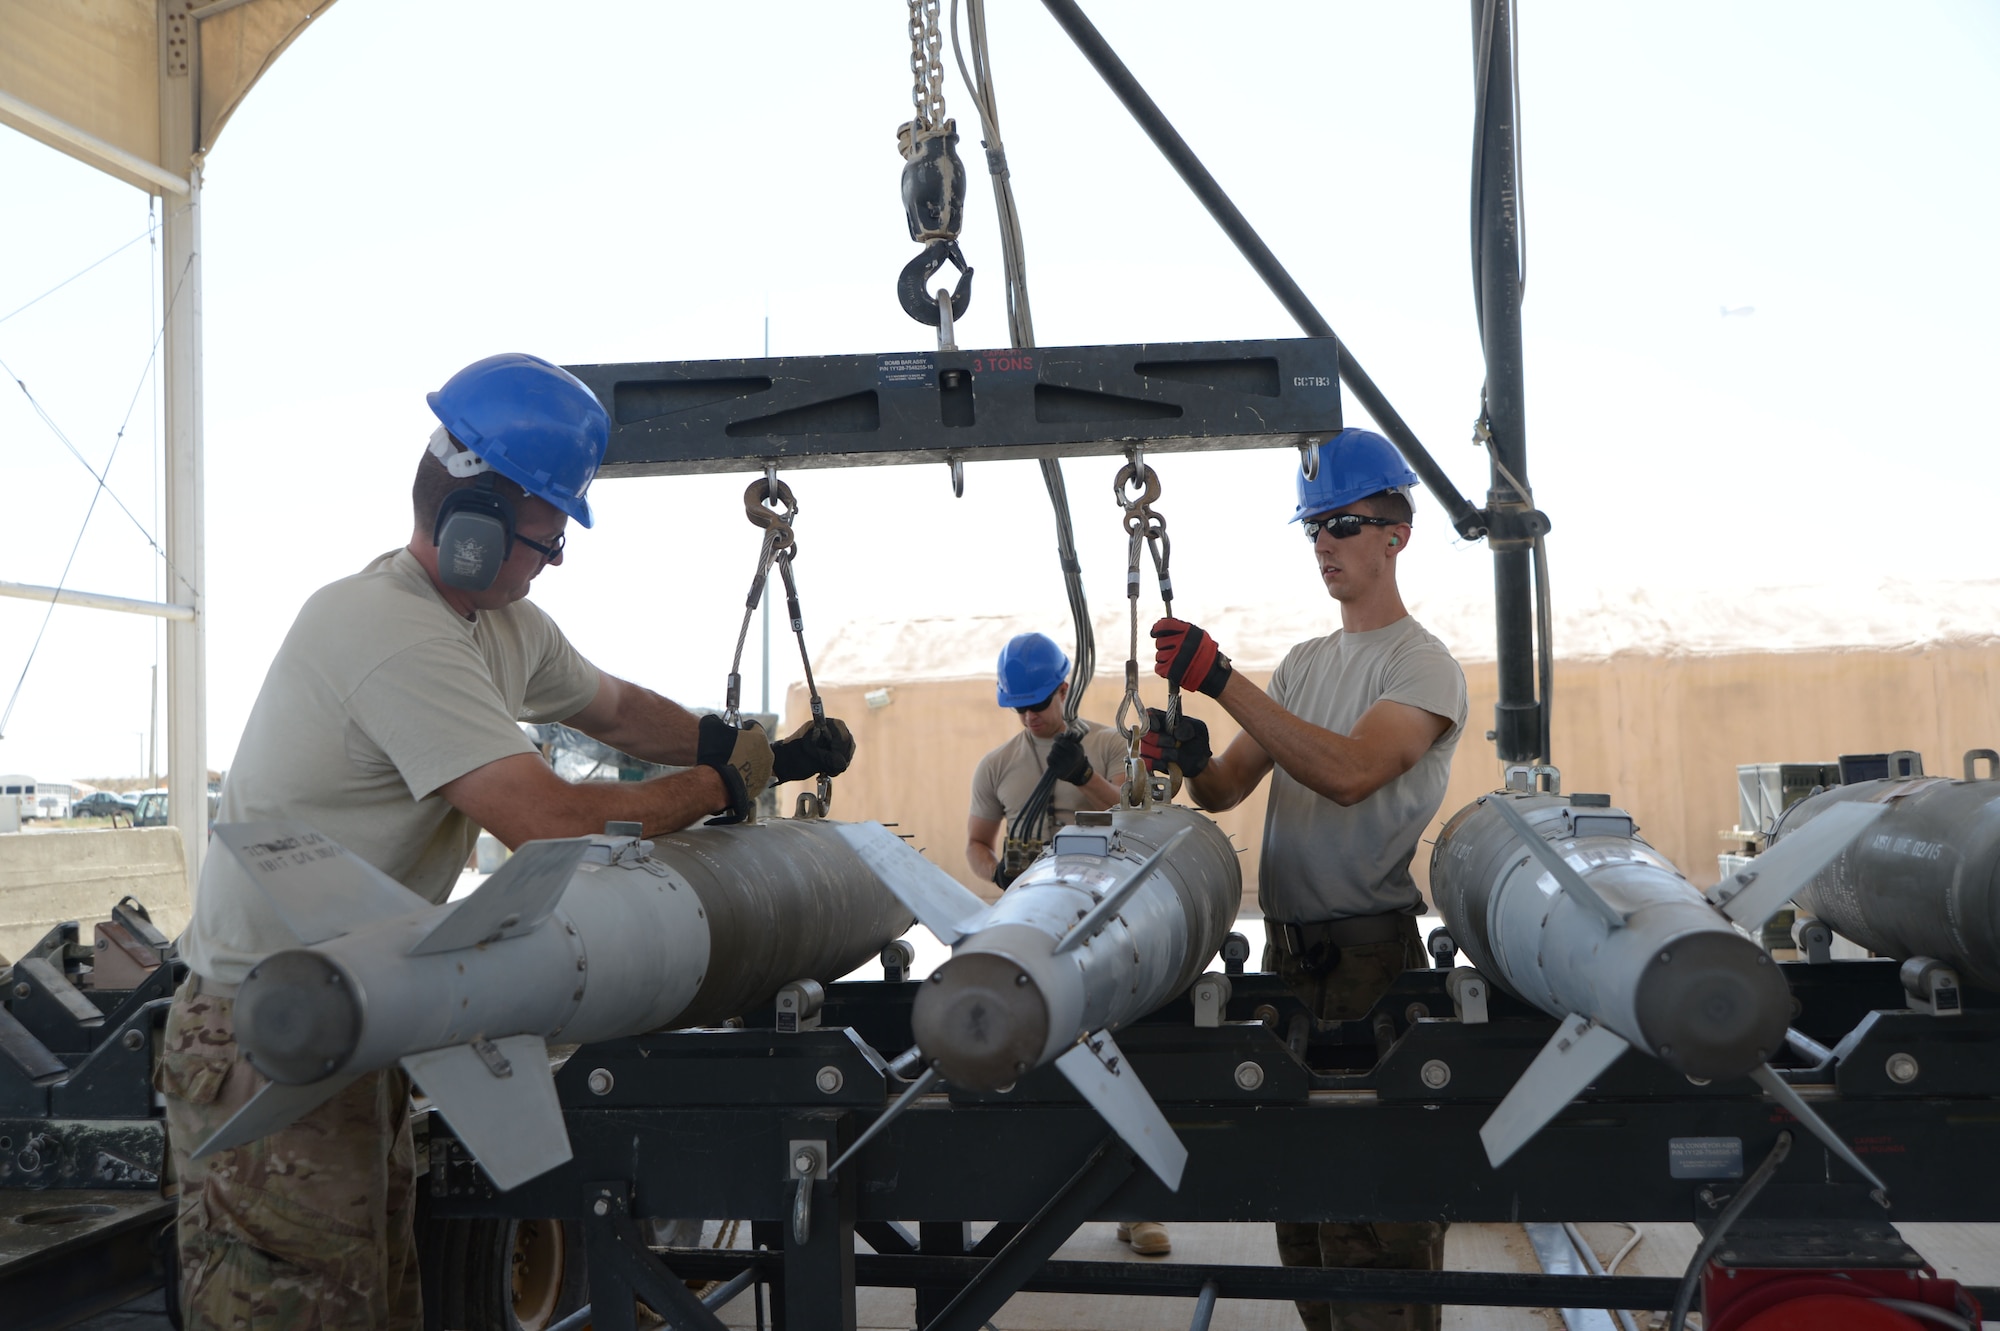 Tech. Sgt. Patrick Williams (left) and Senior Airman Brandon Graves attach GBU-38 bombs to a hoist that will be used with a munitions assembly conveyer to move the bombs during transport Aug. 14, 2014, at Bagram Airfield in support of Operation Enduring Freedom.  Both men are currently assigned to the 455th Expeditionary Maintenance Squadron and both are reservists deployed from the 442nd Fighter Wing, Whiteman Air Force Base, Mo. (U.S. Air Force photo by Master Sgt. Cohen A. Young)